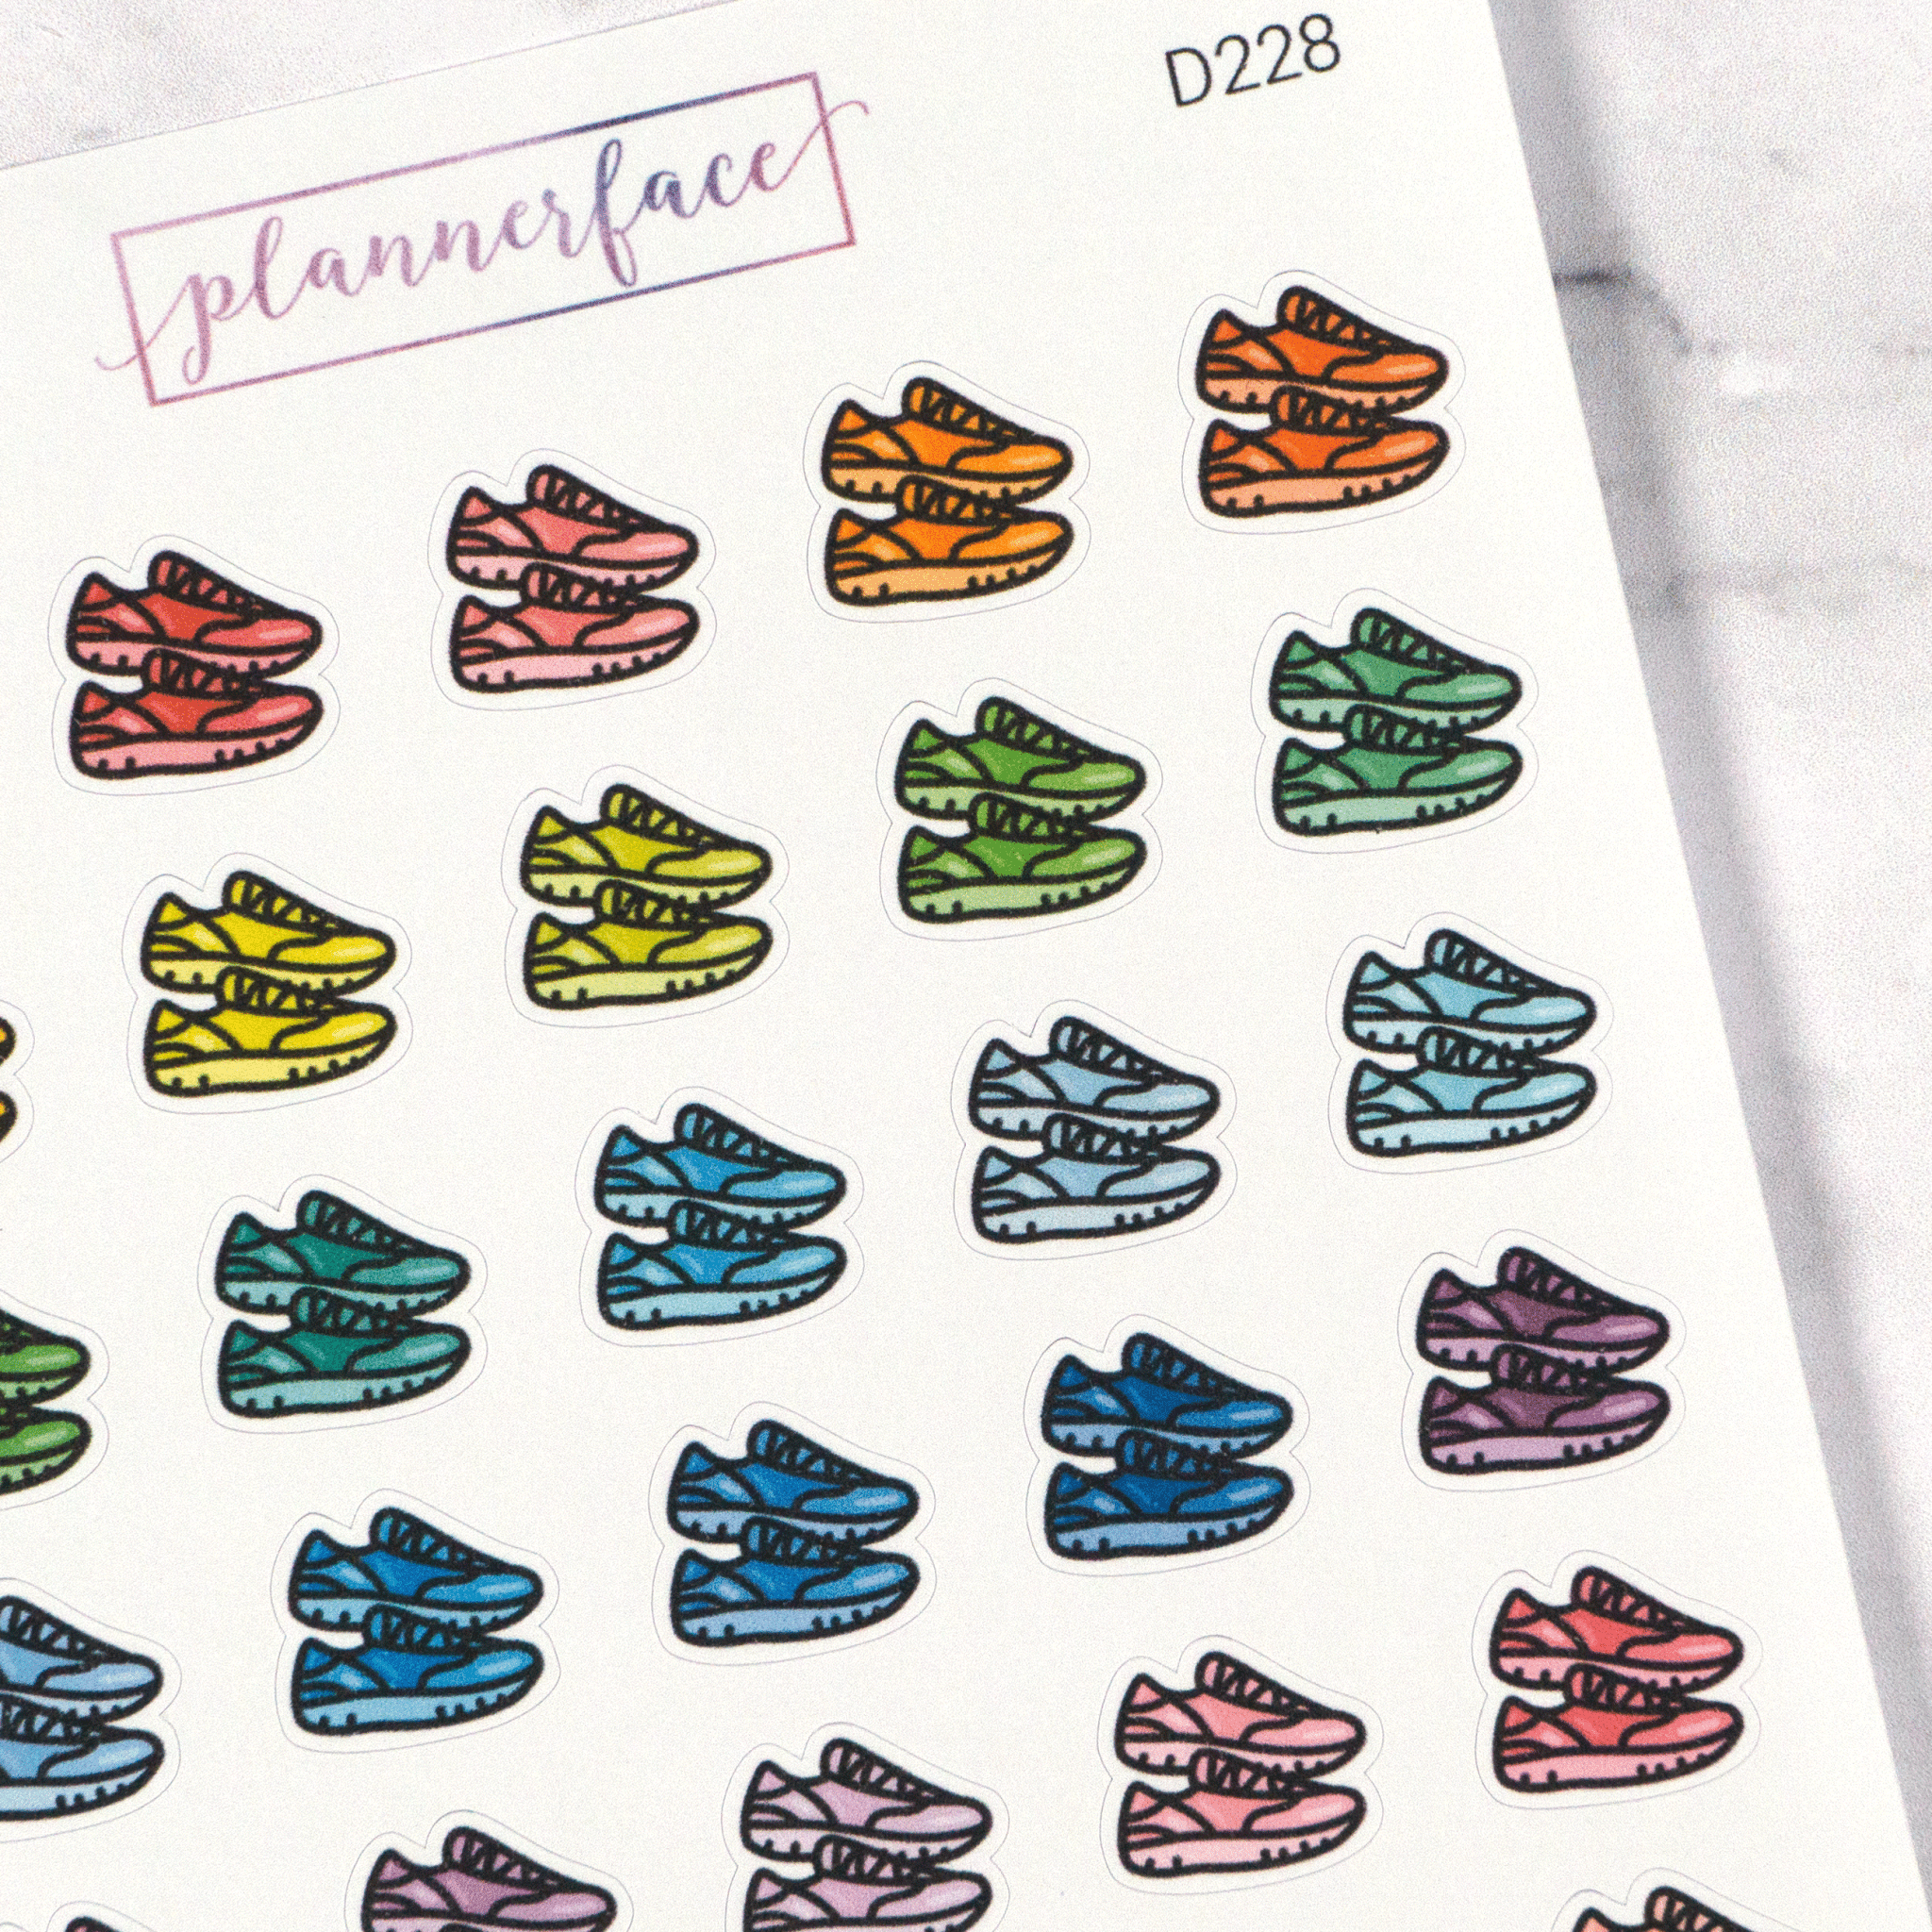 Running Shoes Multicolour Doodles by Plannerface